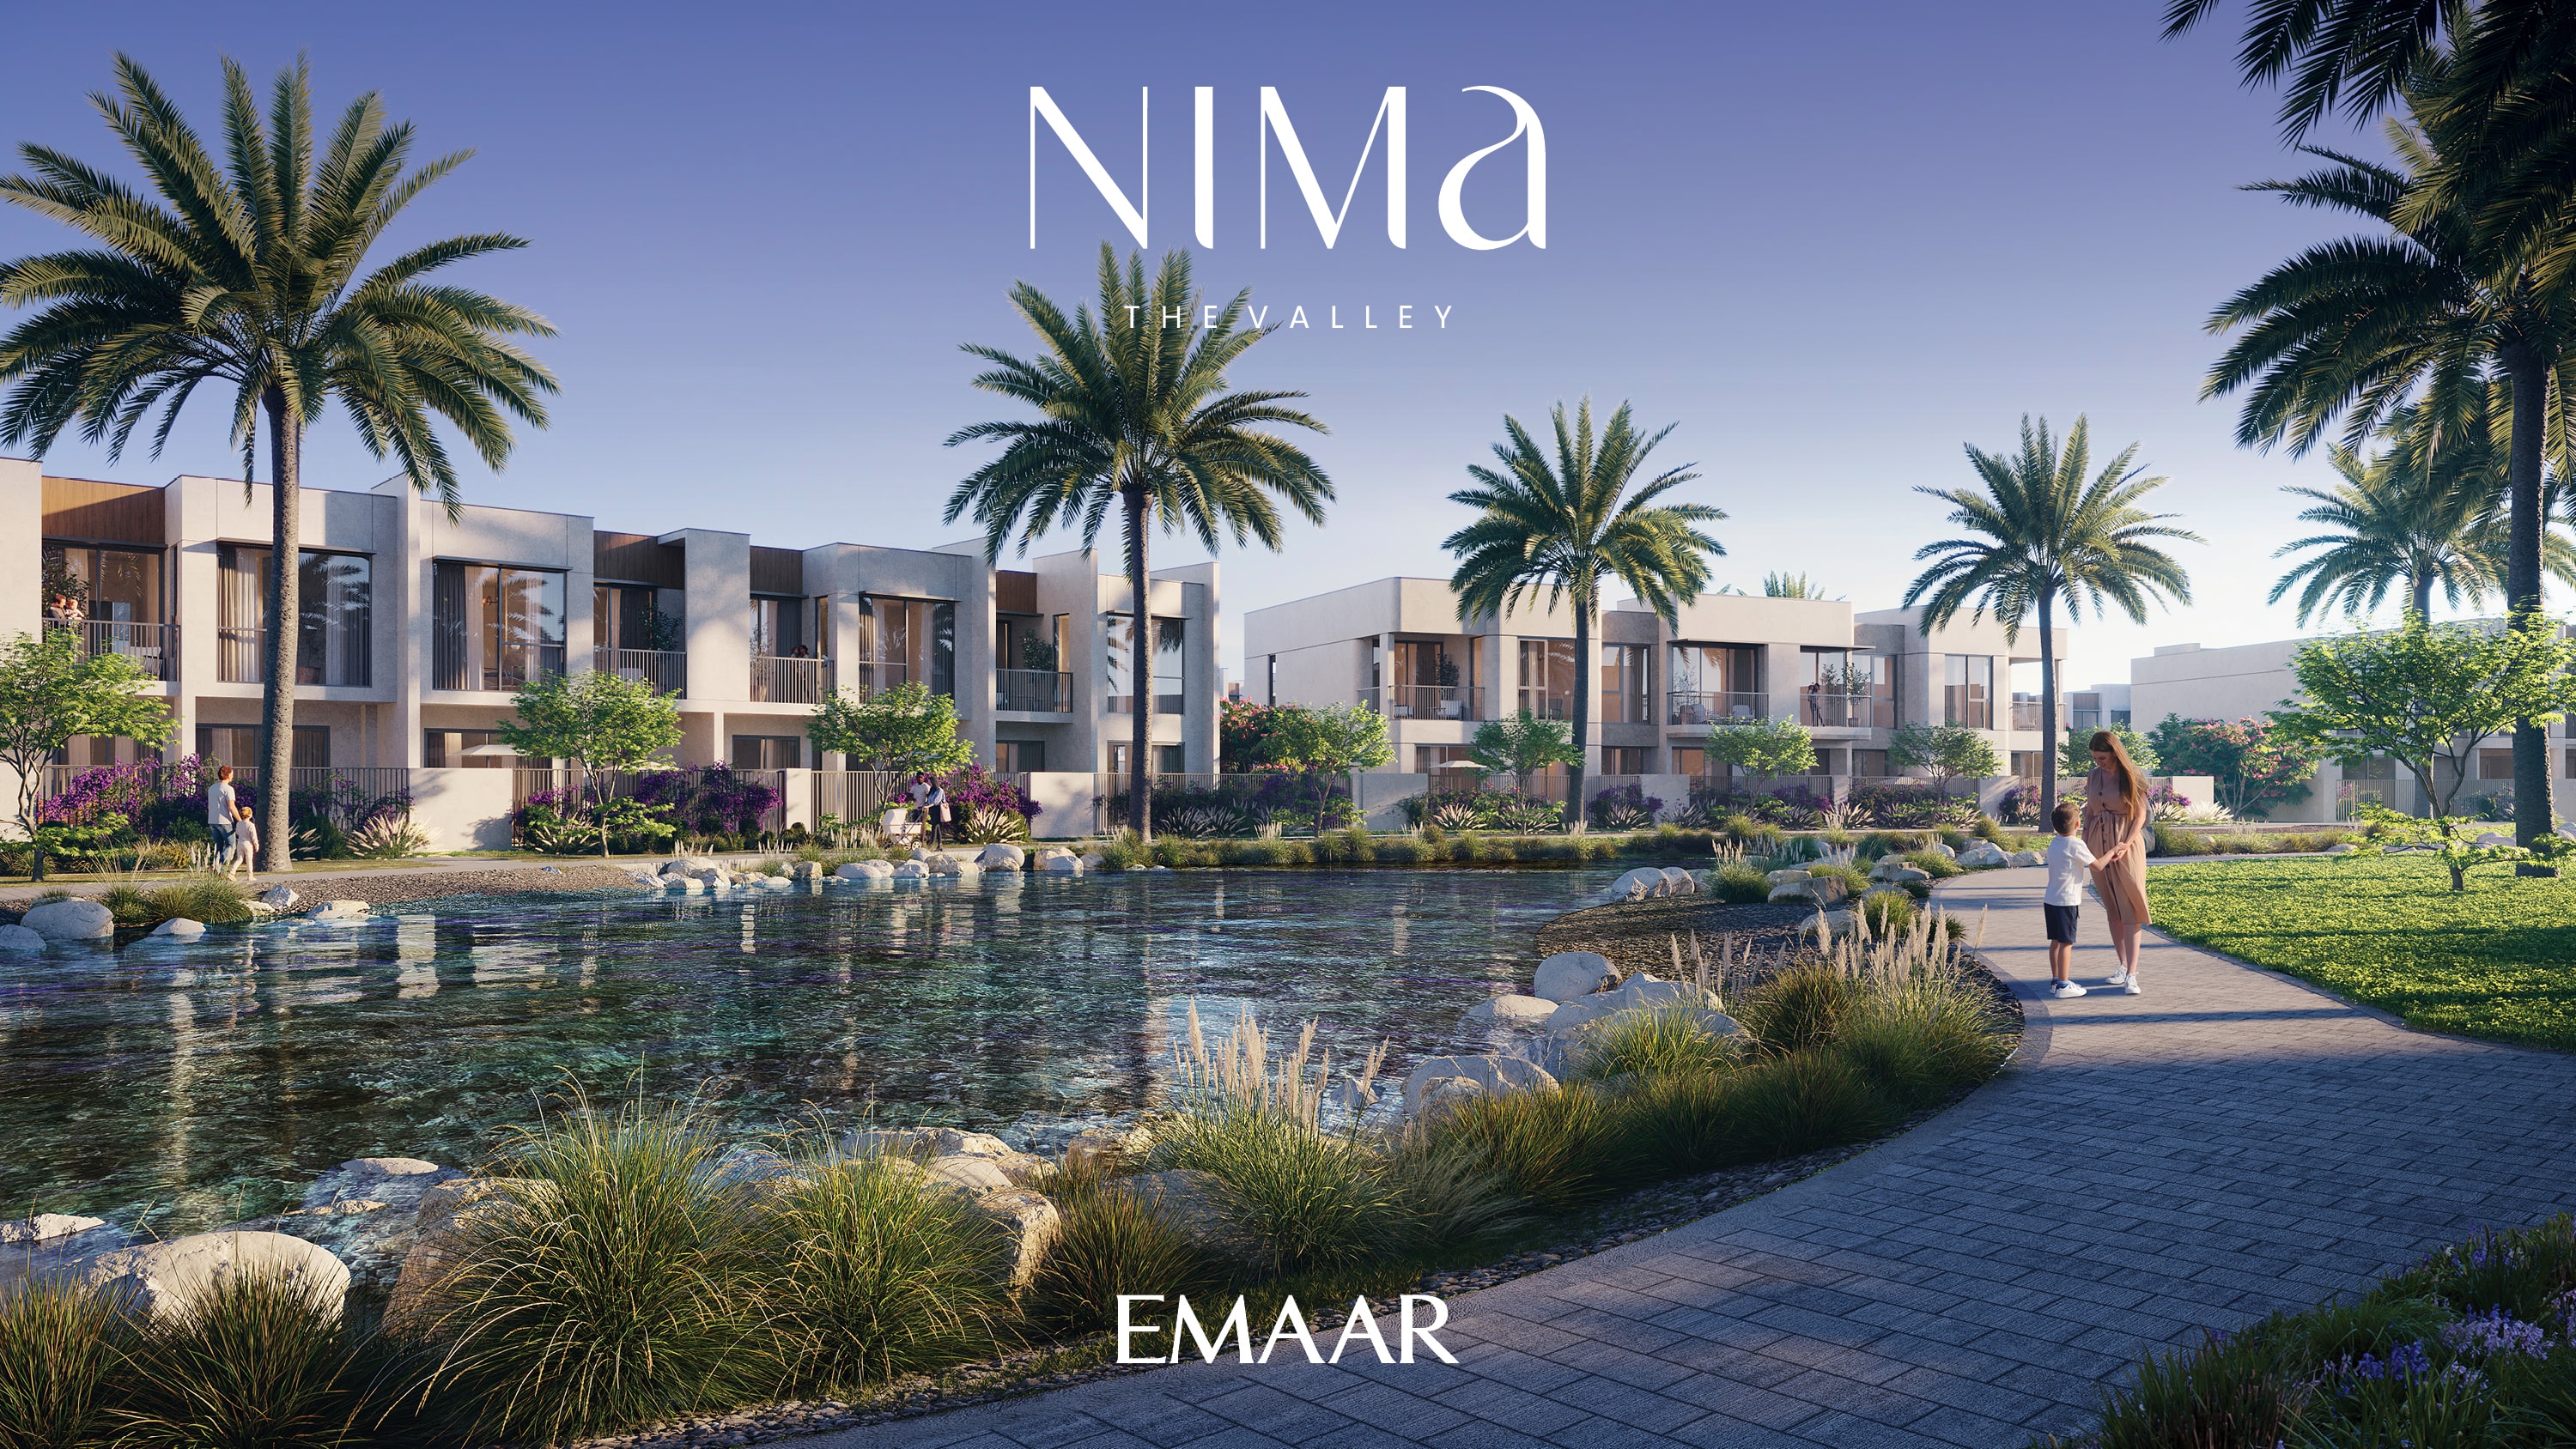 3 & 4BR Nima Townhouses in The Valley.